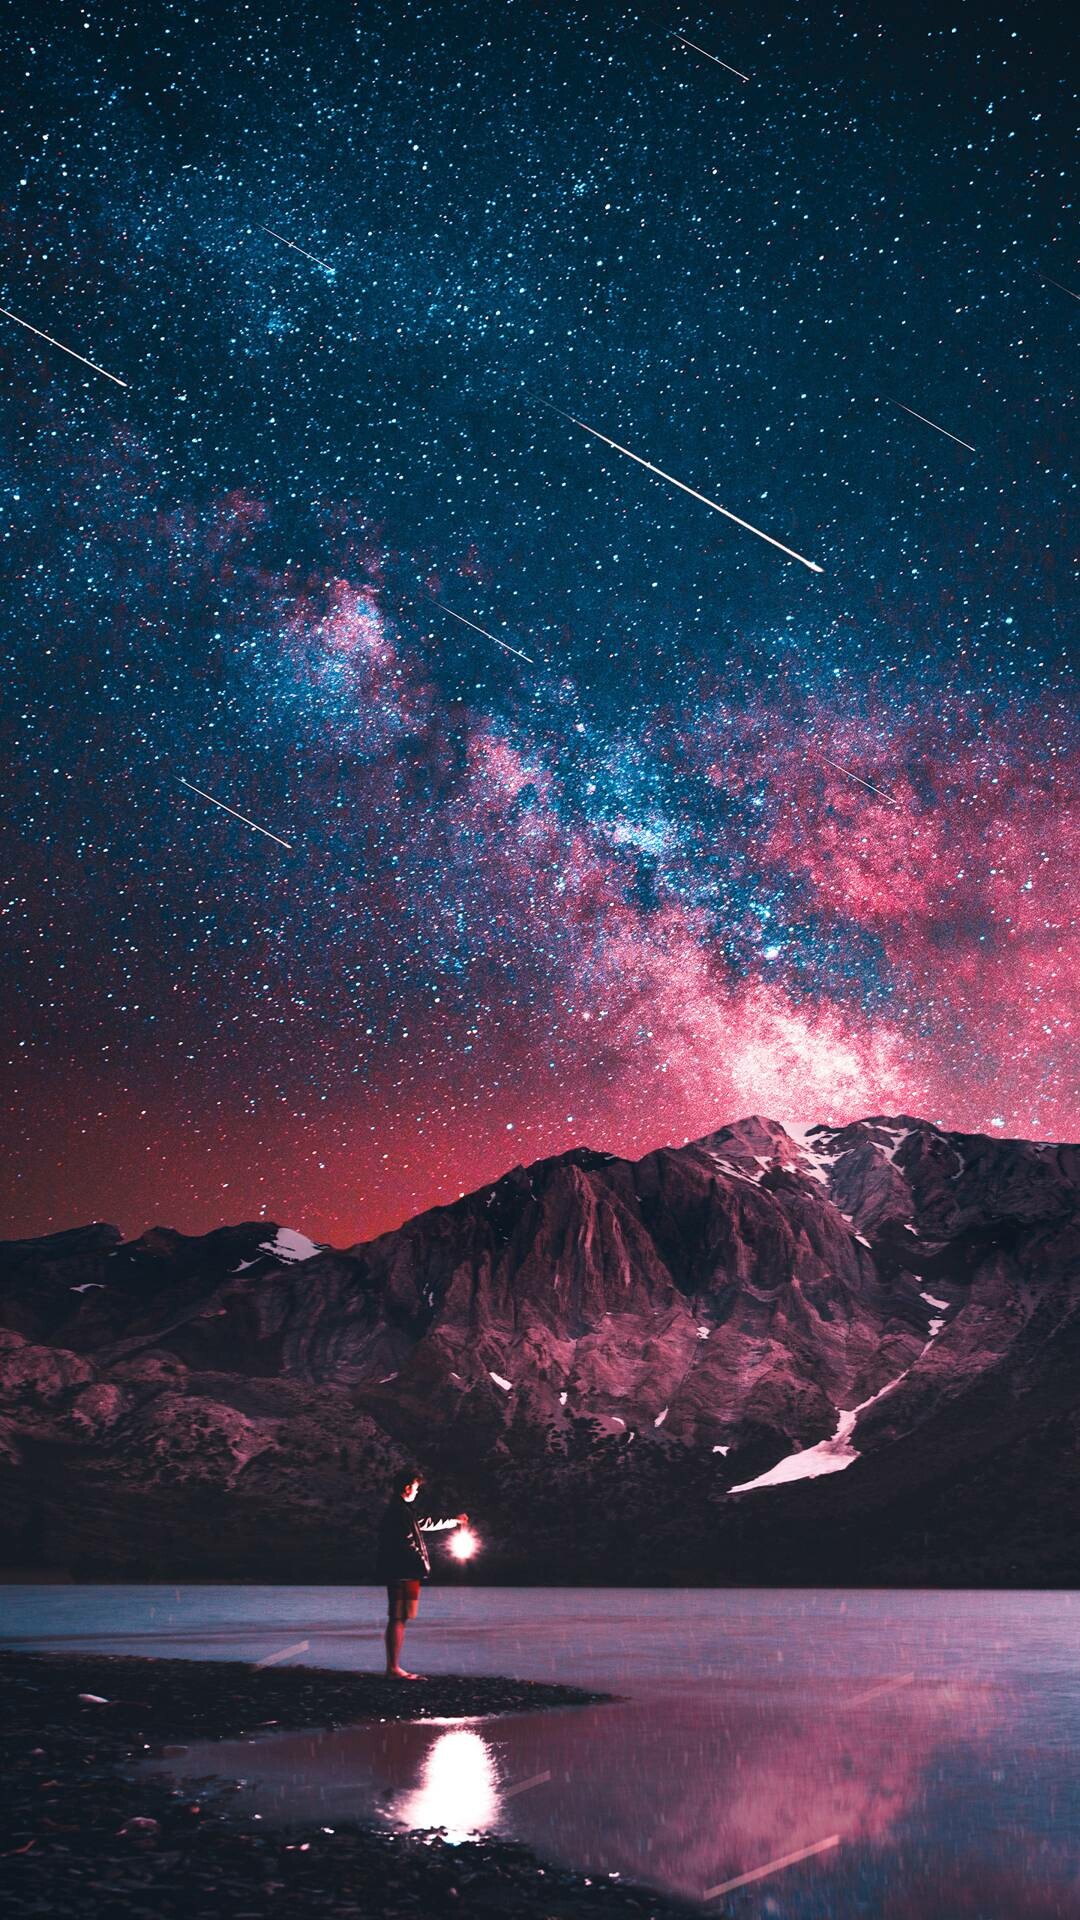 Meteor: Night sky, The visible display of a meteoroid, Shooting stars. 1080x1920 Full HD Wallpaper.